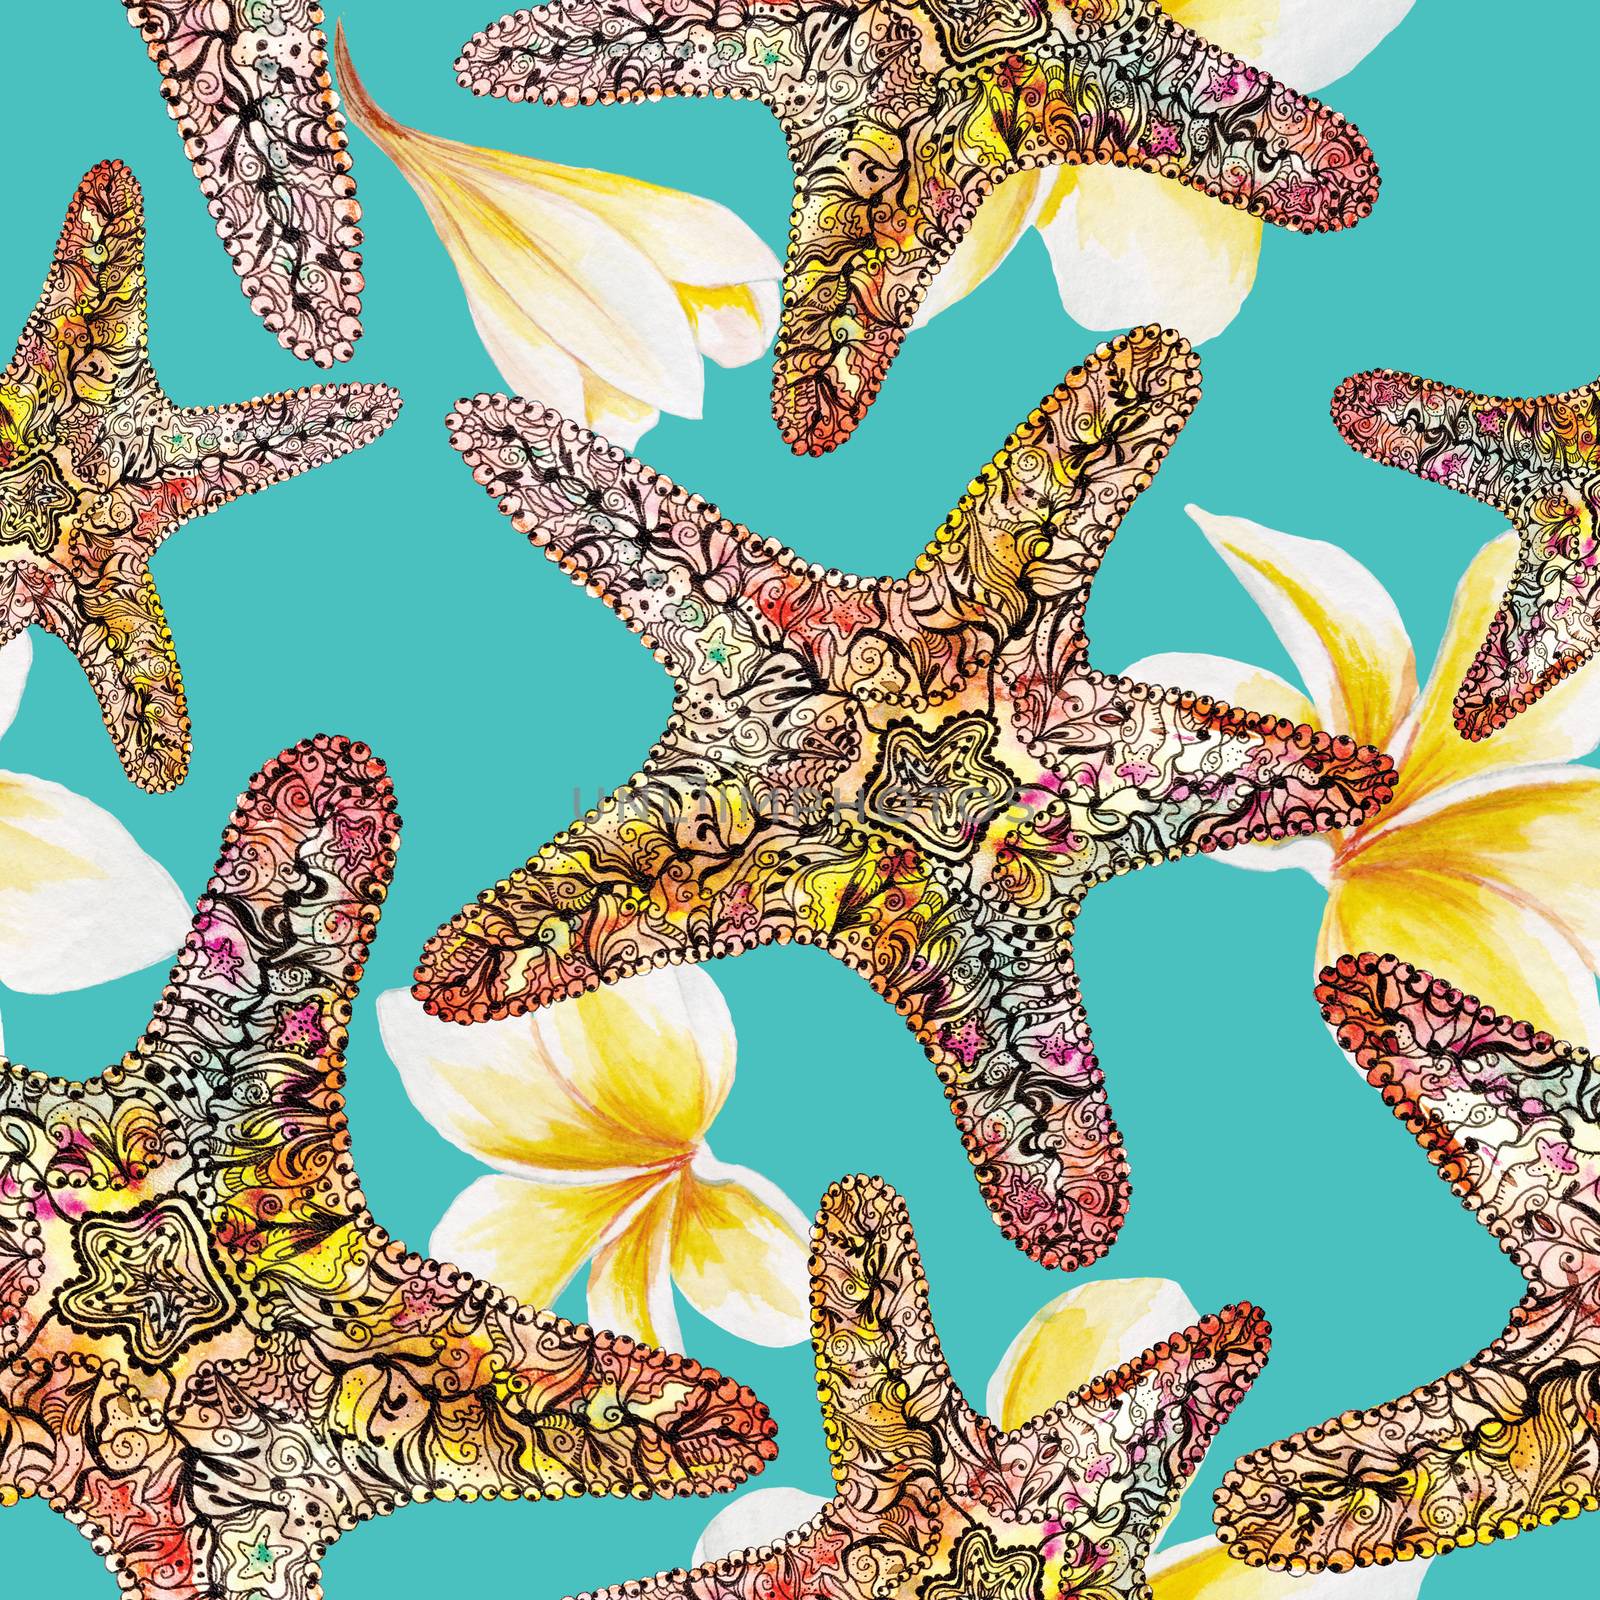 Seamless artistic background with tropical flowers and starfish on turquoise background